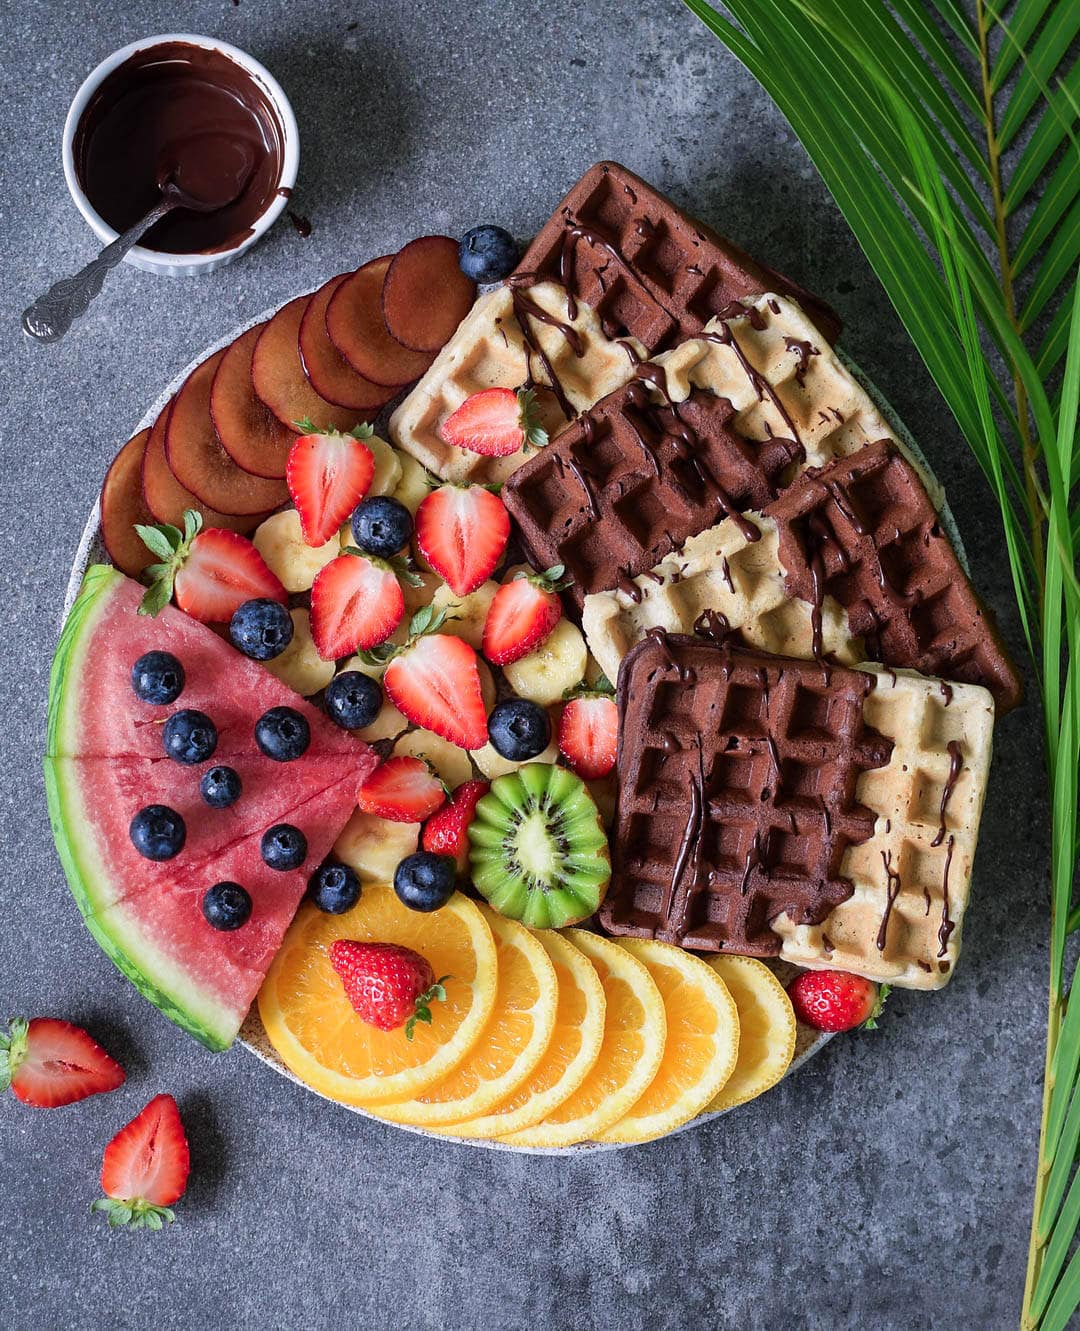 Gluten-free vegan waffles with fruits, a chocolate sauce, arranged on a board